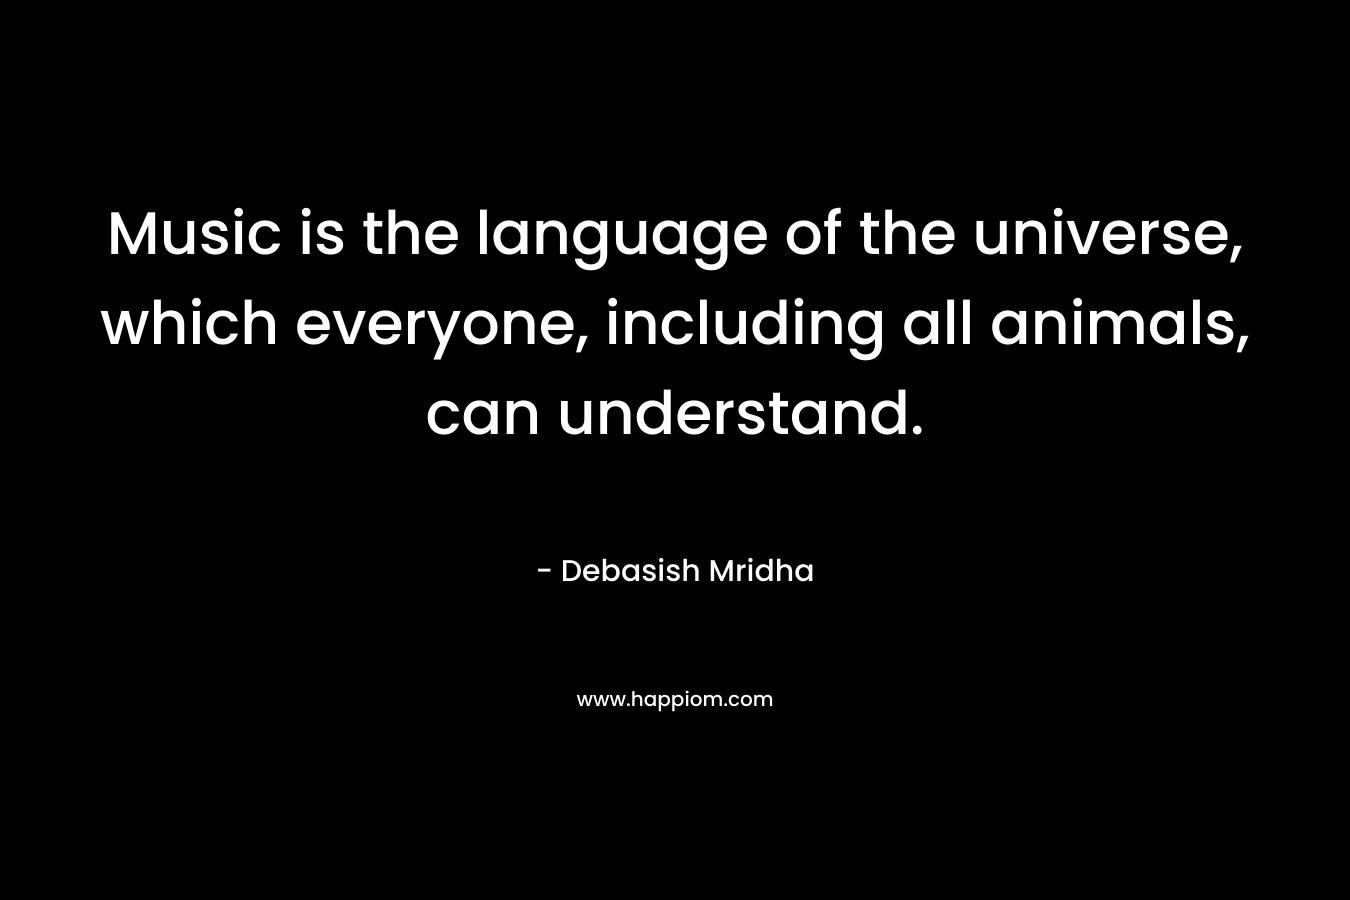 Music is the language of the universe, which everyone, including all animals, can understand.